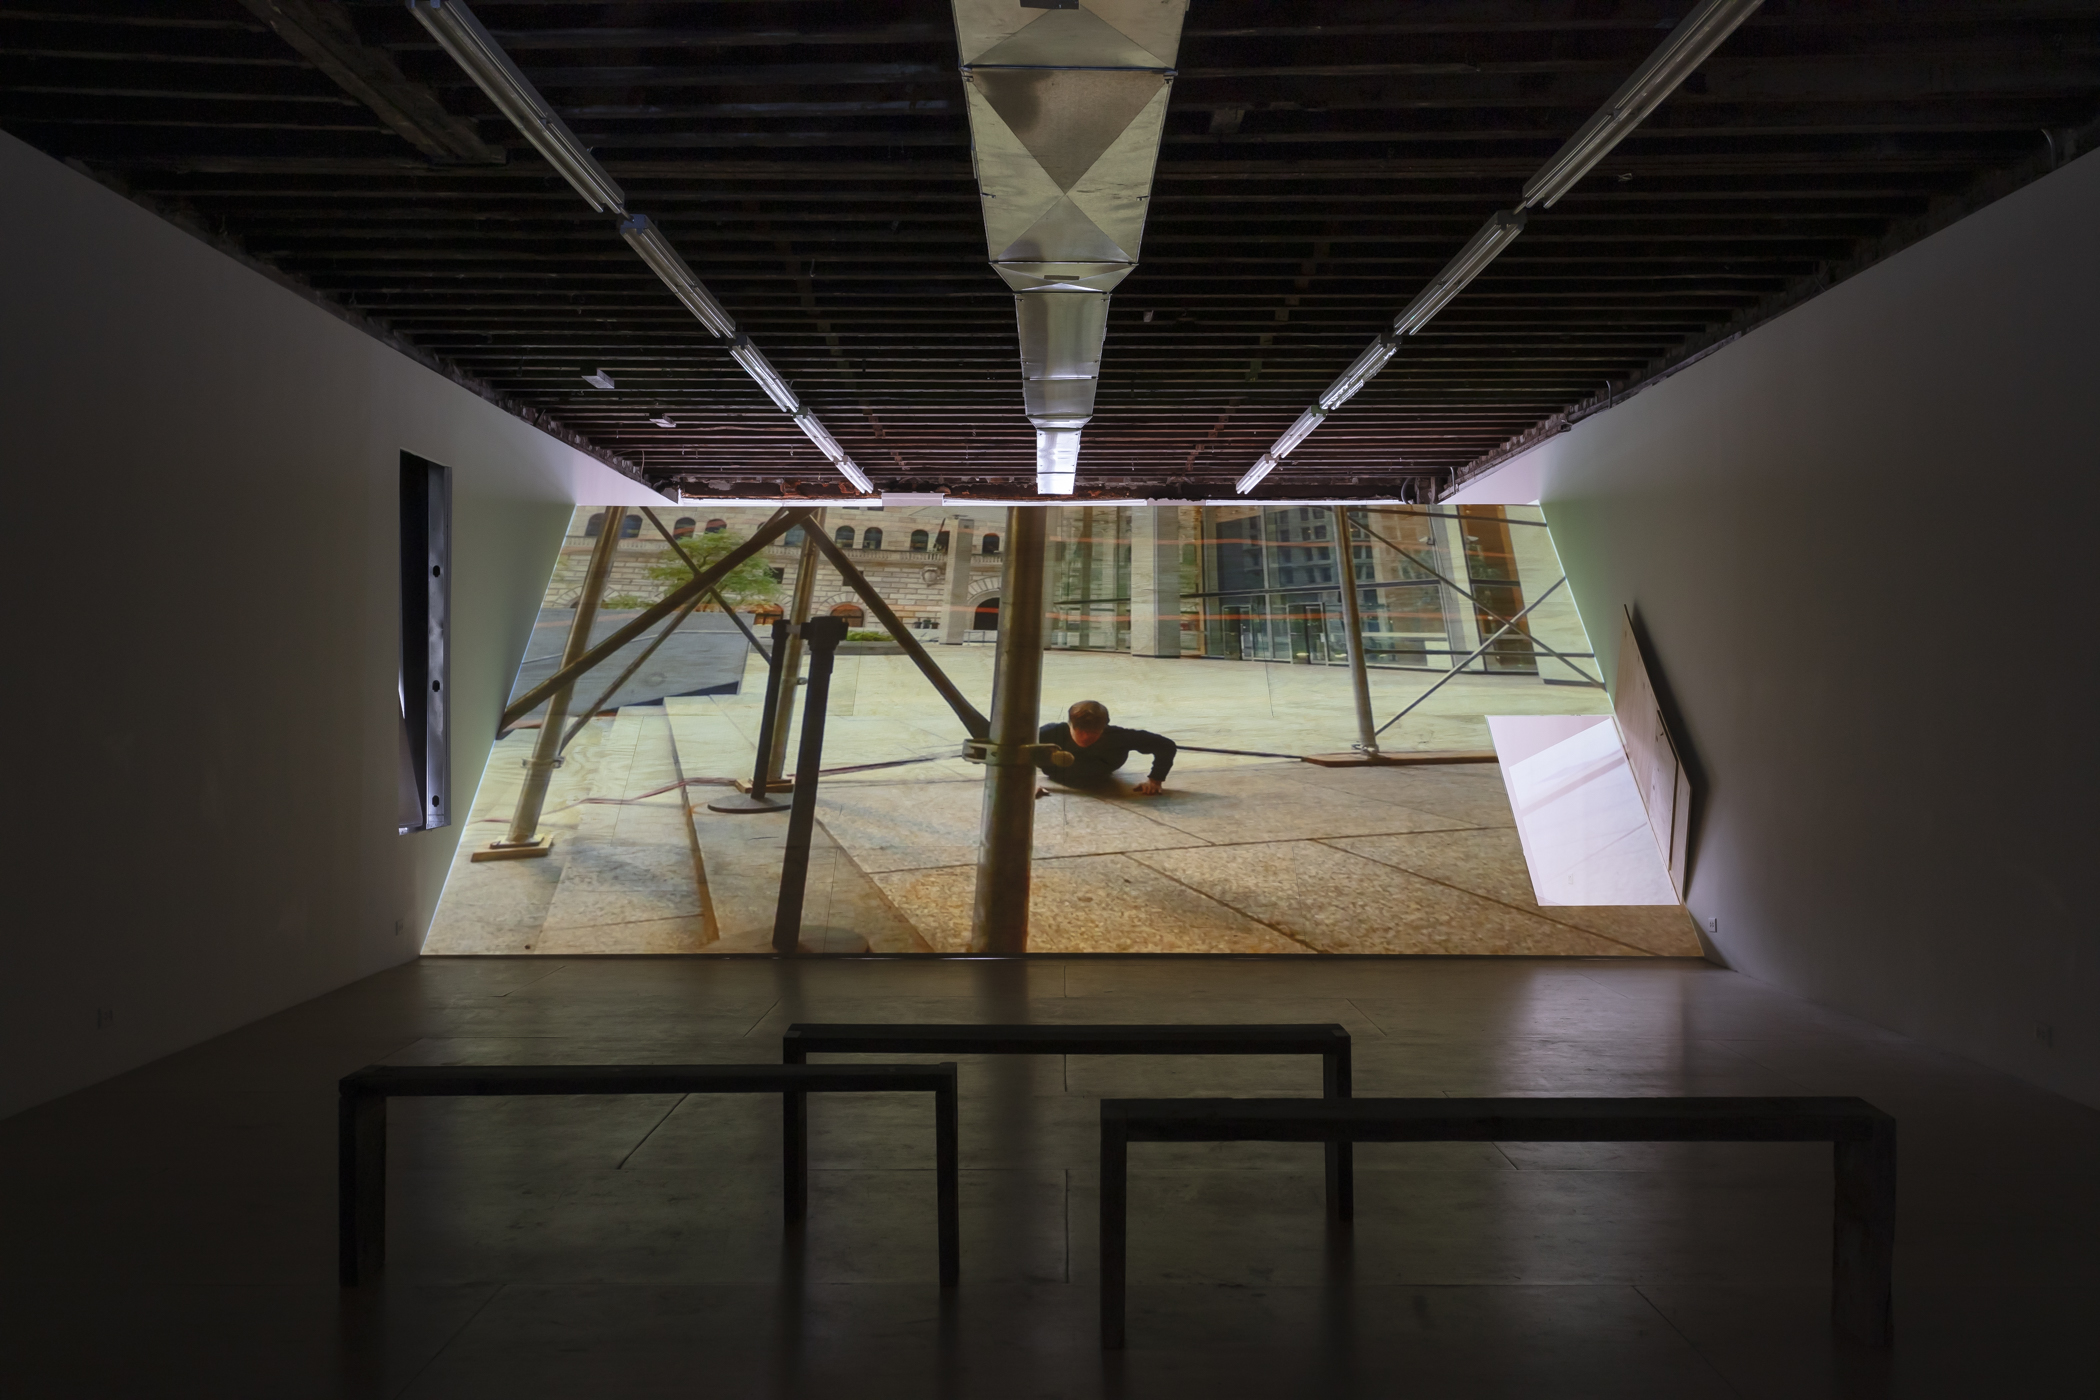 video still of artist falling on pavement projected onto wooden ramp